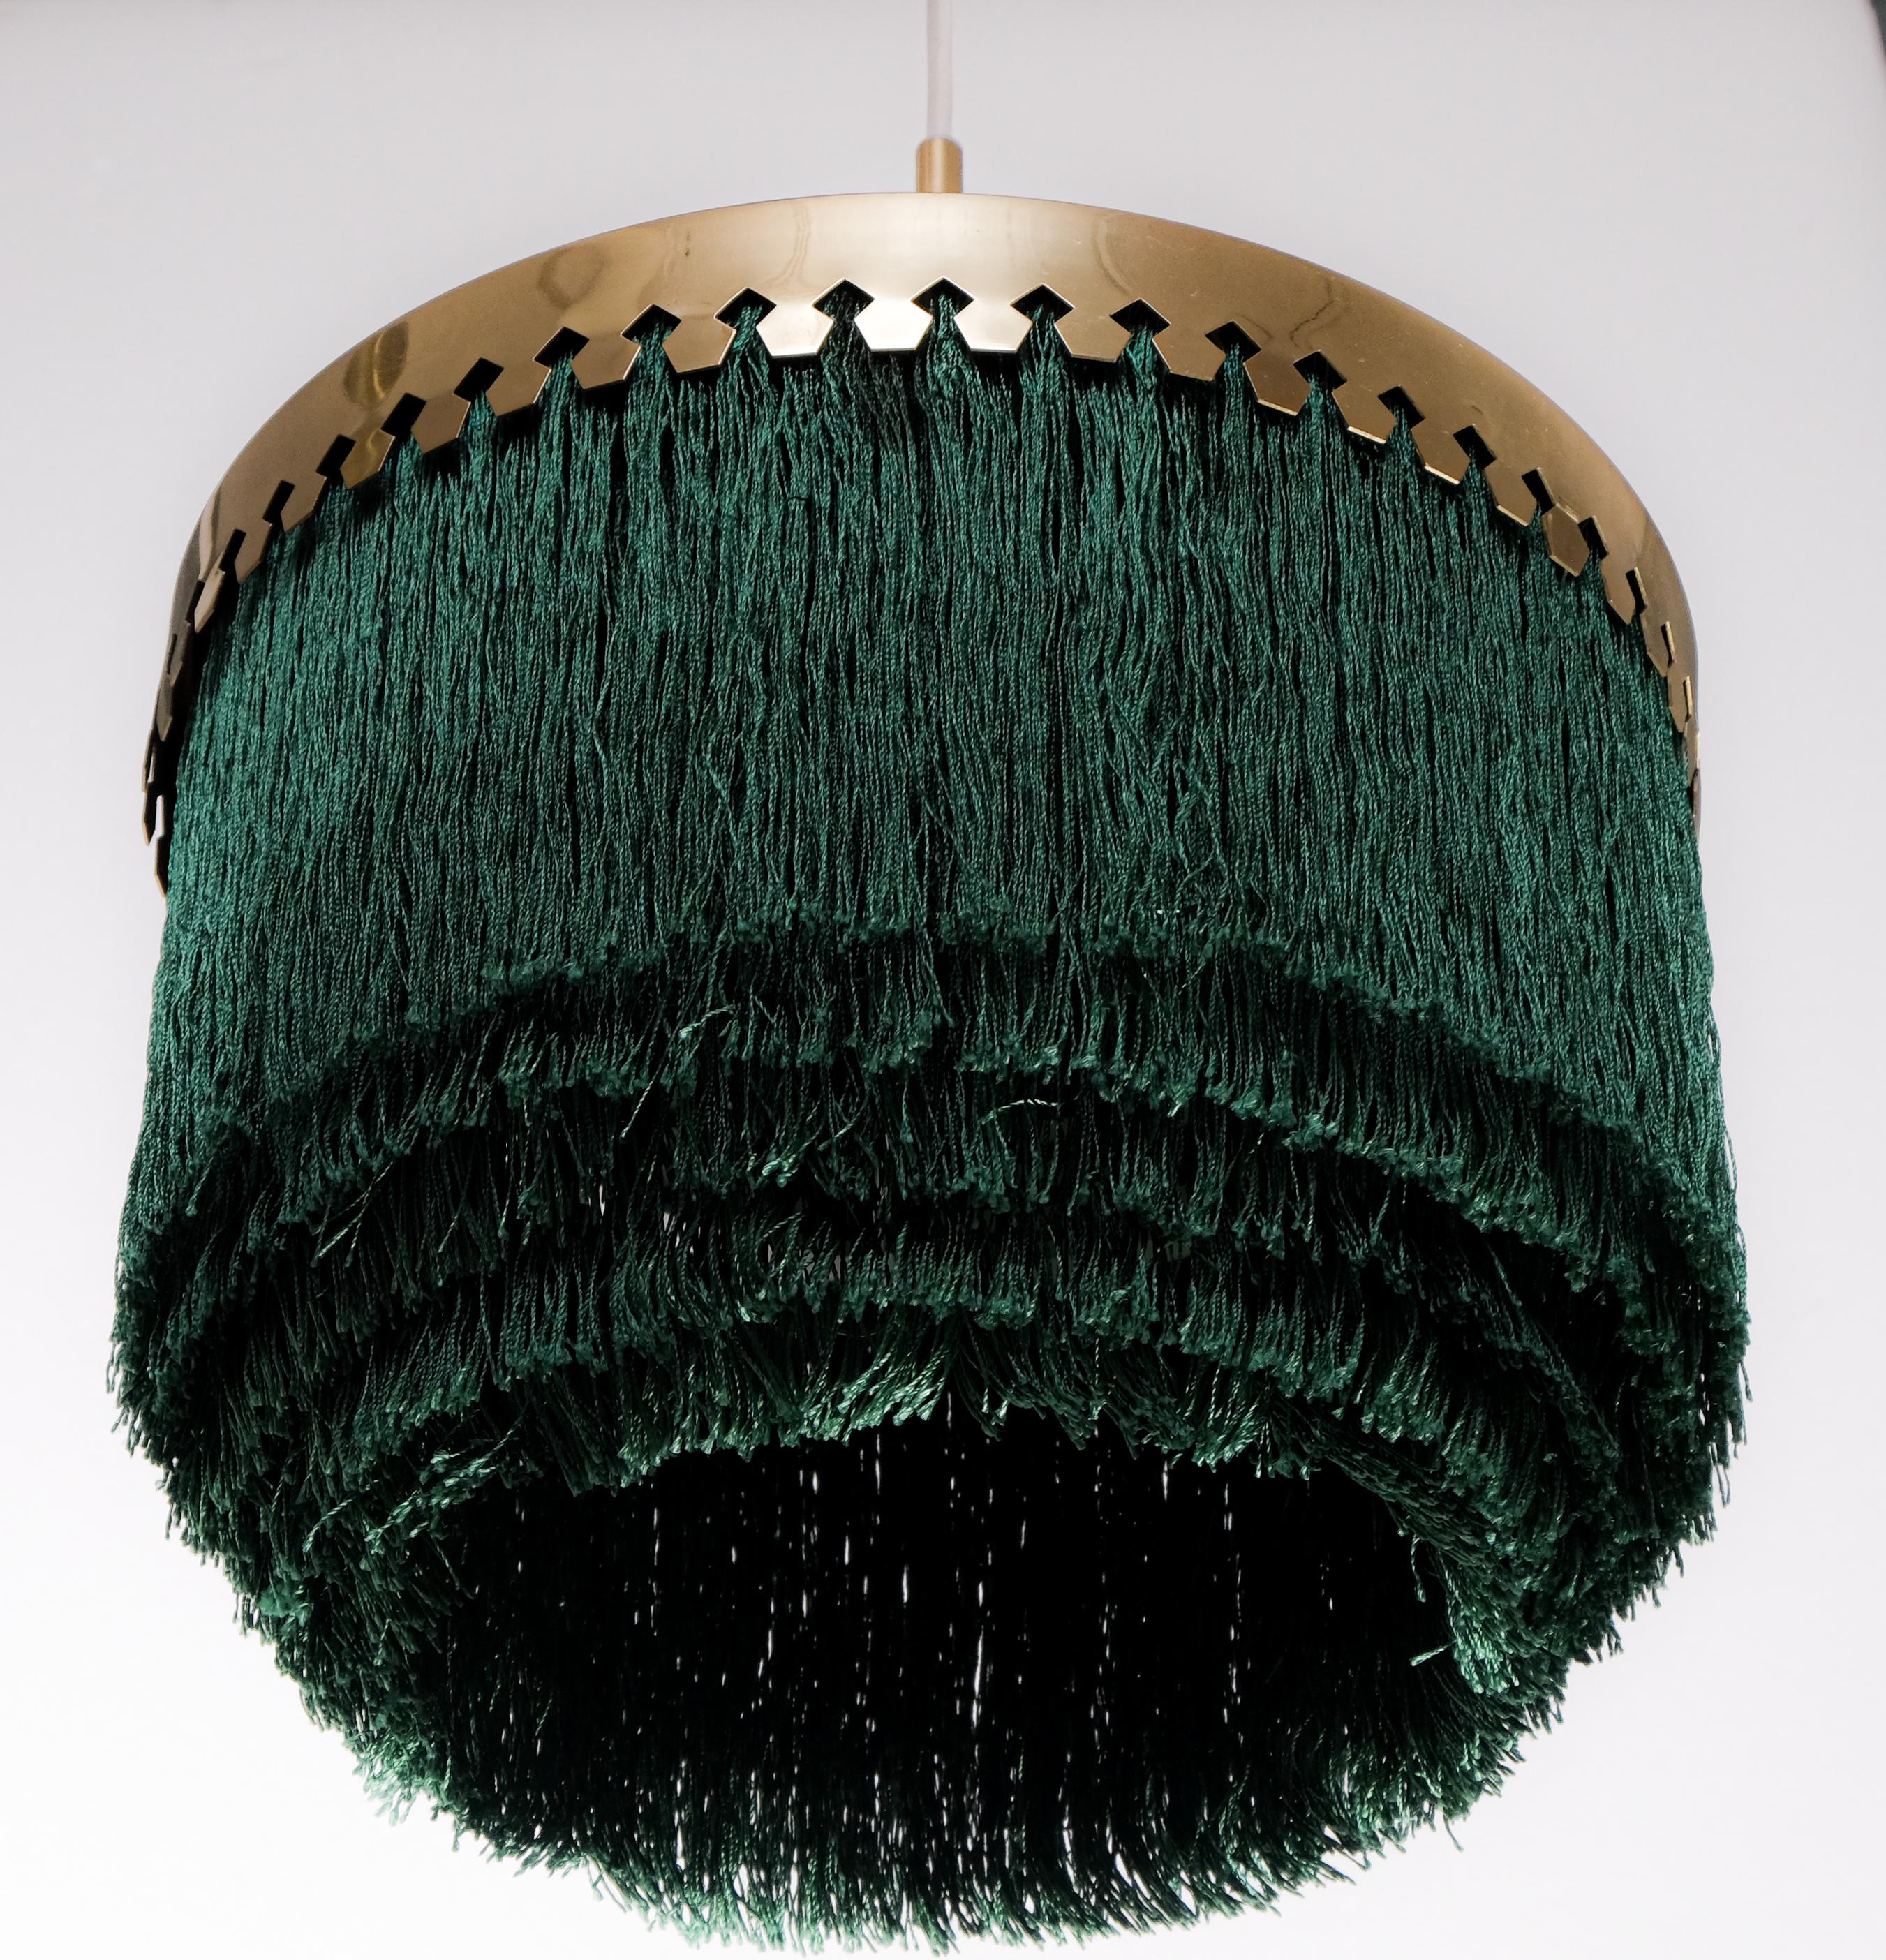 Brass and green silk fringes. Produced by Hans-Agne Jakobsson, Markaryd, Sweden, 1960s.
Measure: Diameter 28 cm. Height is adjustable.